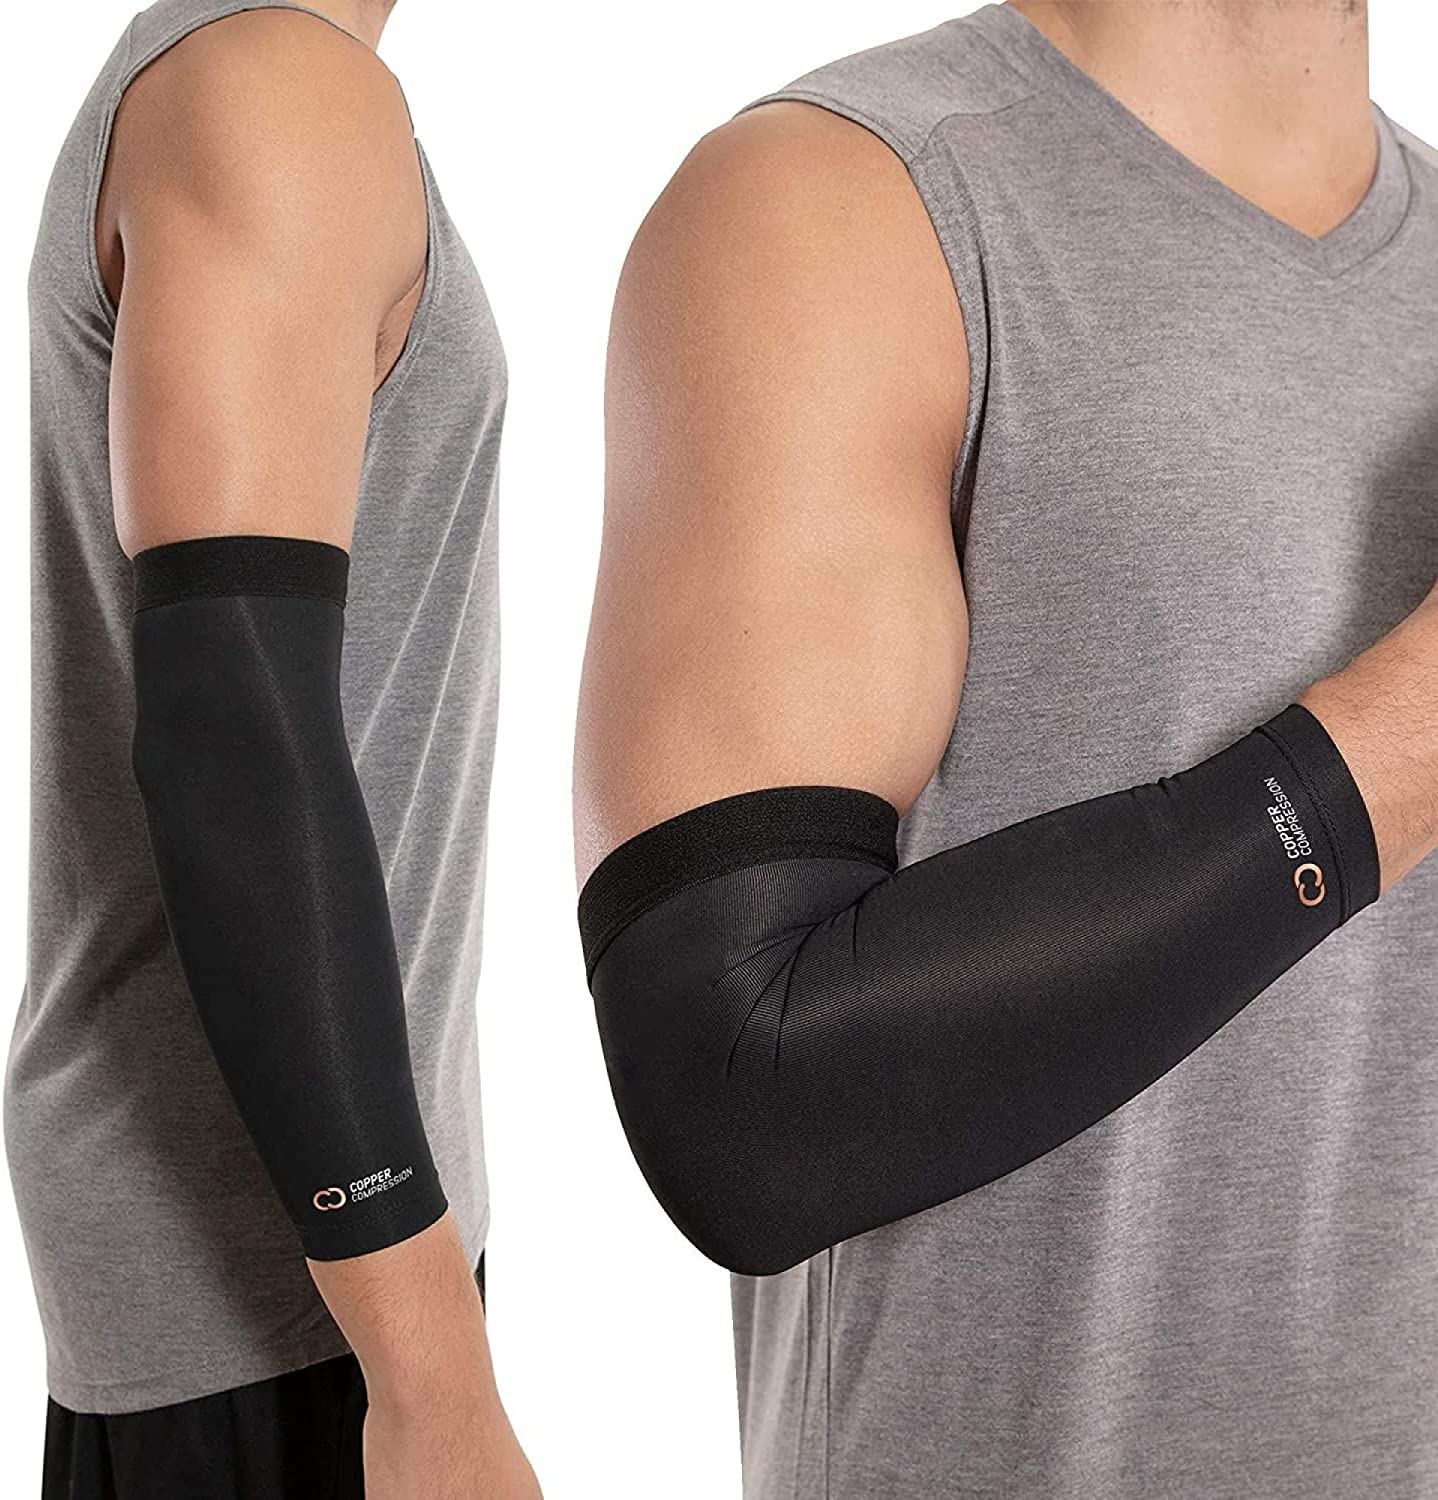  Arm Brace - Copper Infused Sleeve For Arms, Forearm